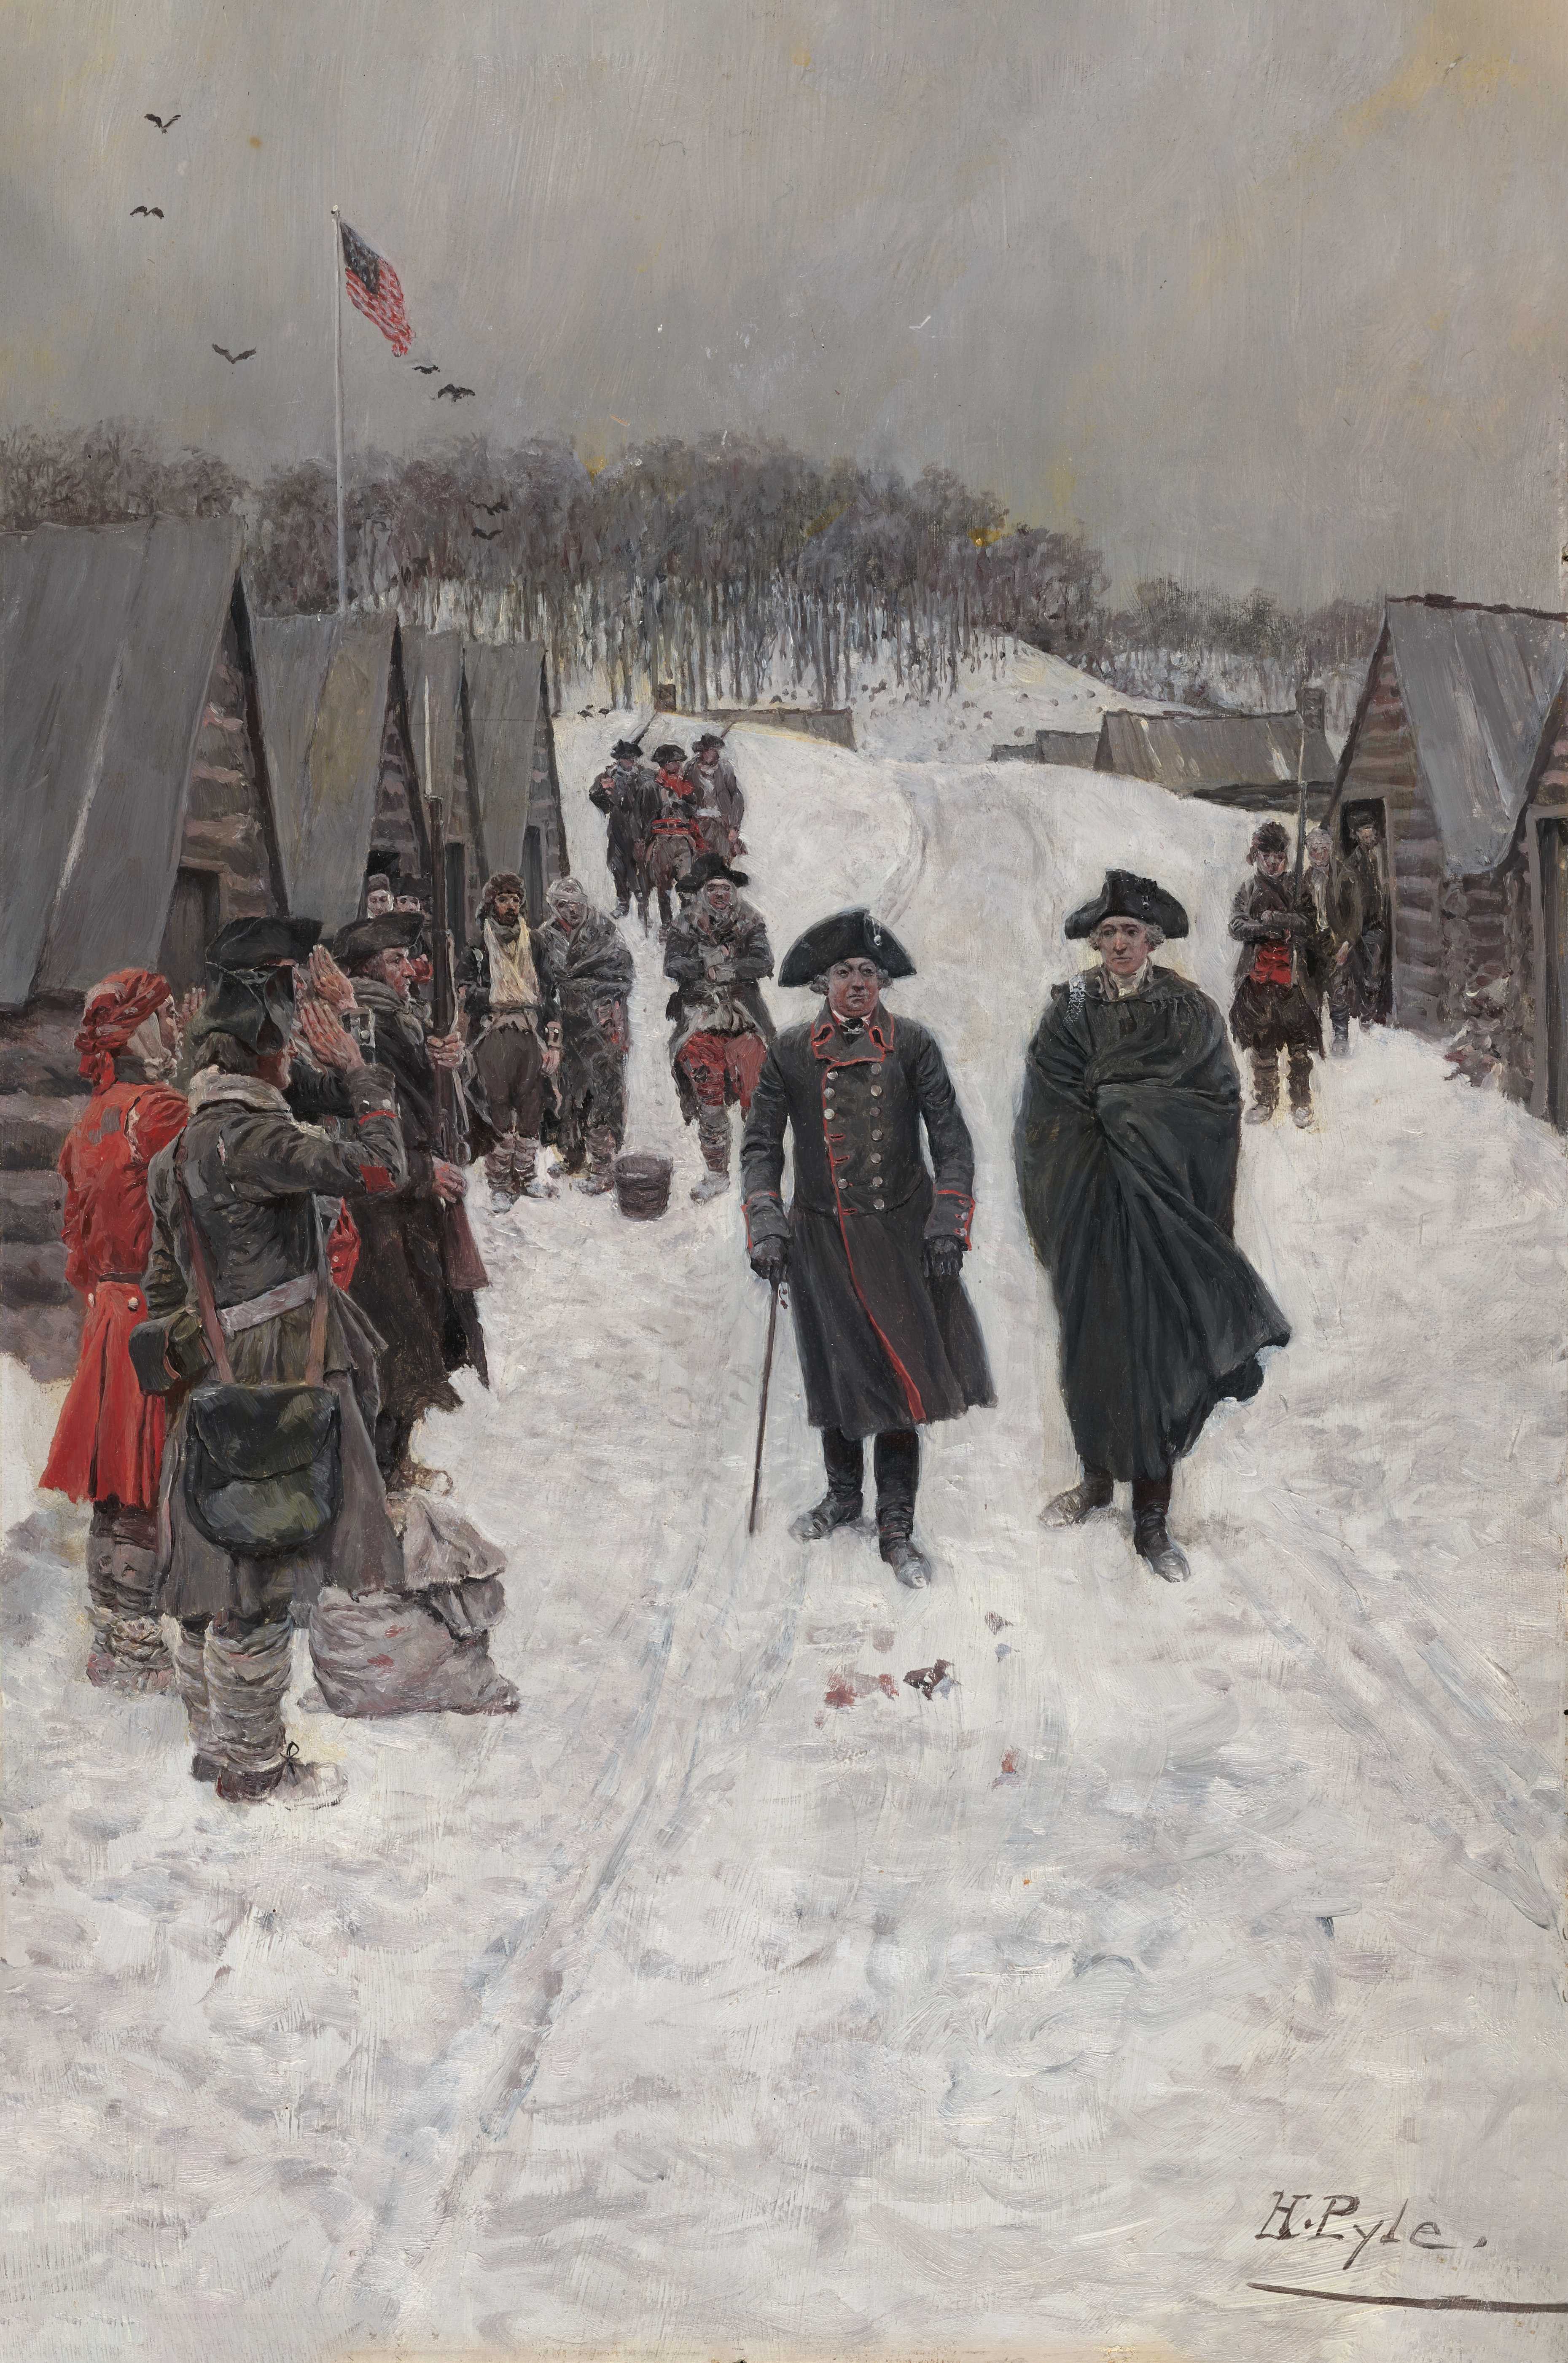 Find out more about Howard Pyle - Washington and Von Steuben at Valley Forge